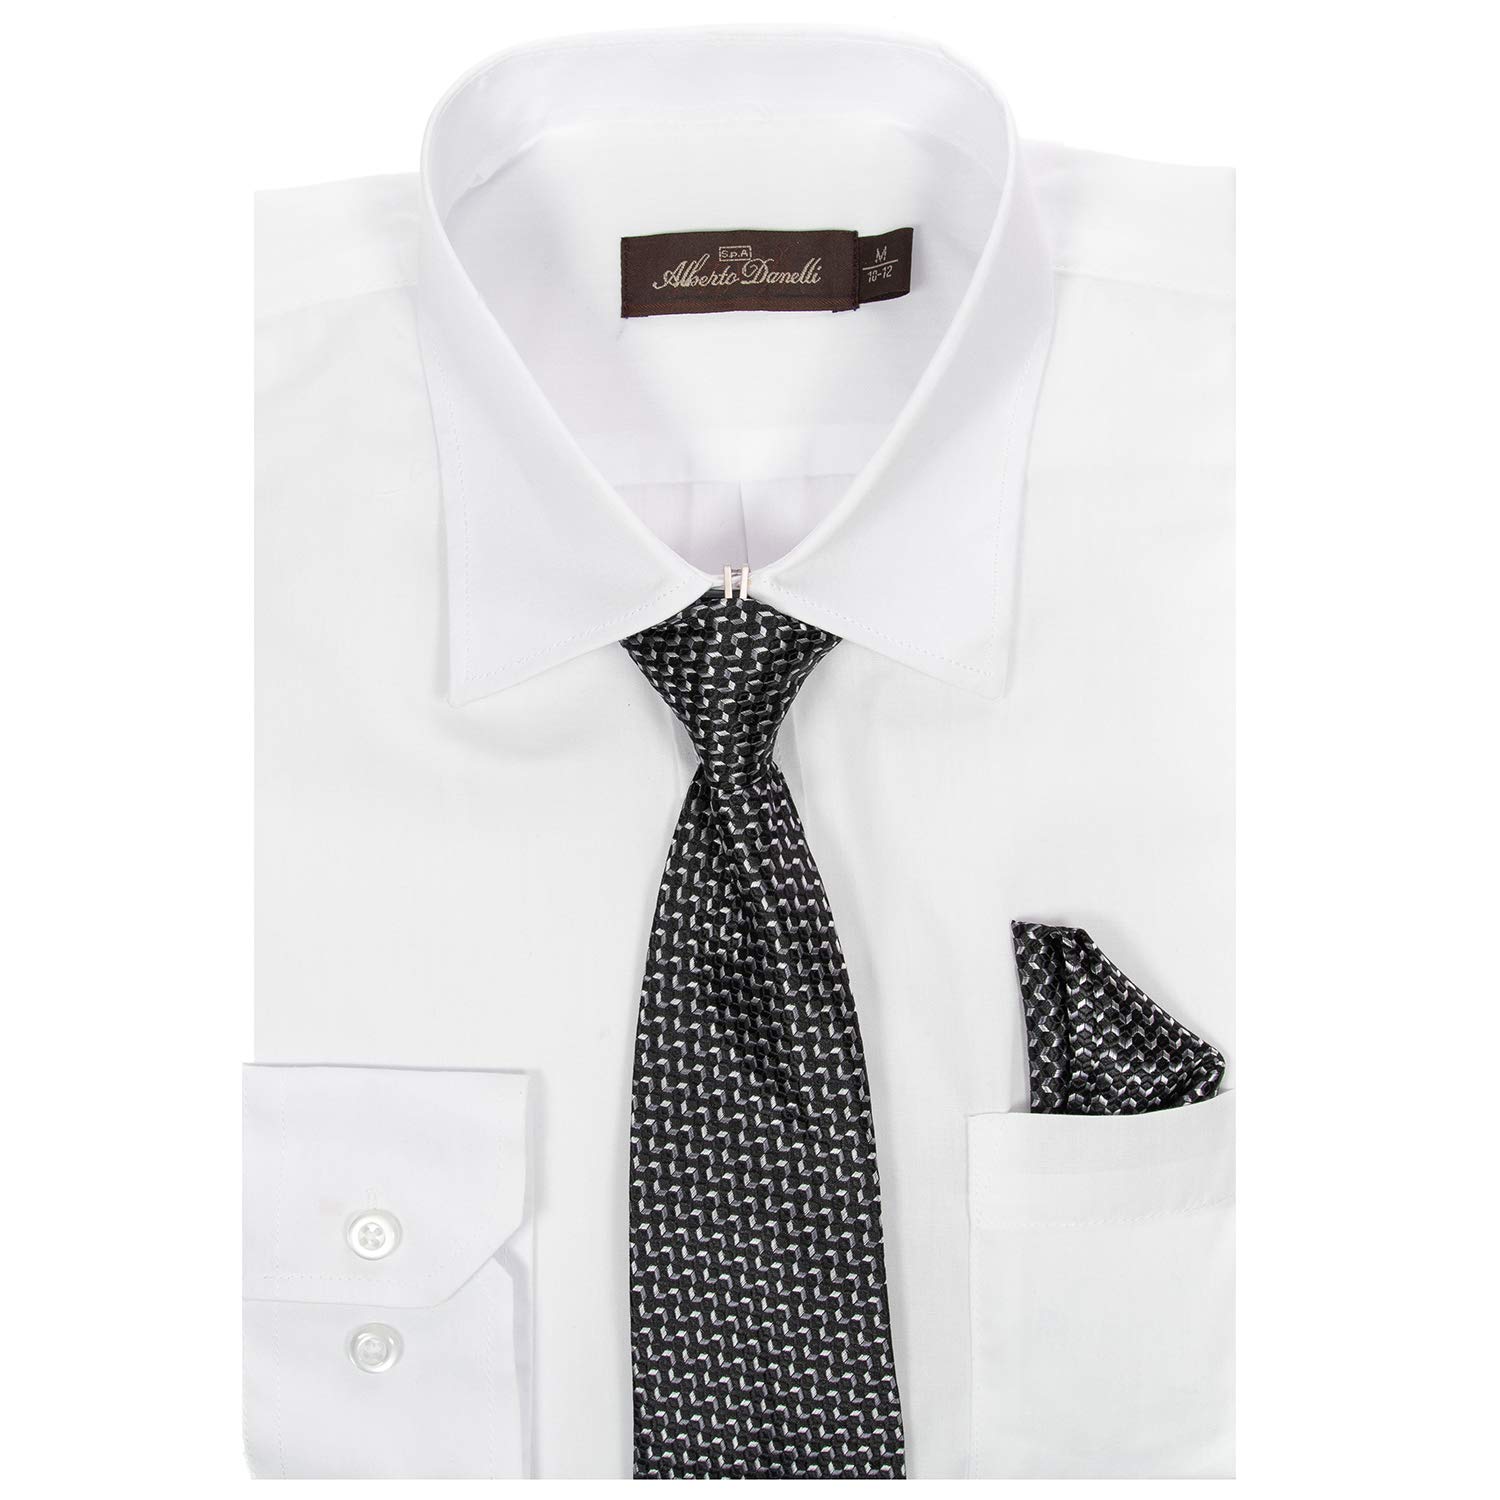 Alberto Danelli Boys Dress Shirt With Matching Tie And Handkerchief, Long Sleeve Button Down, Pocket, White C, 8